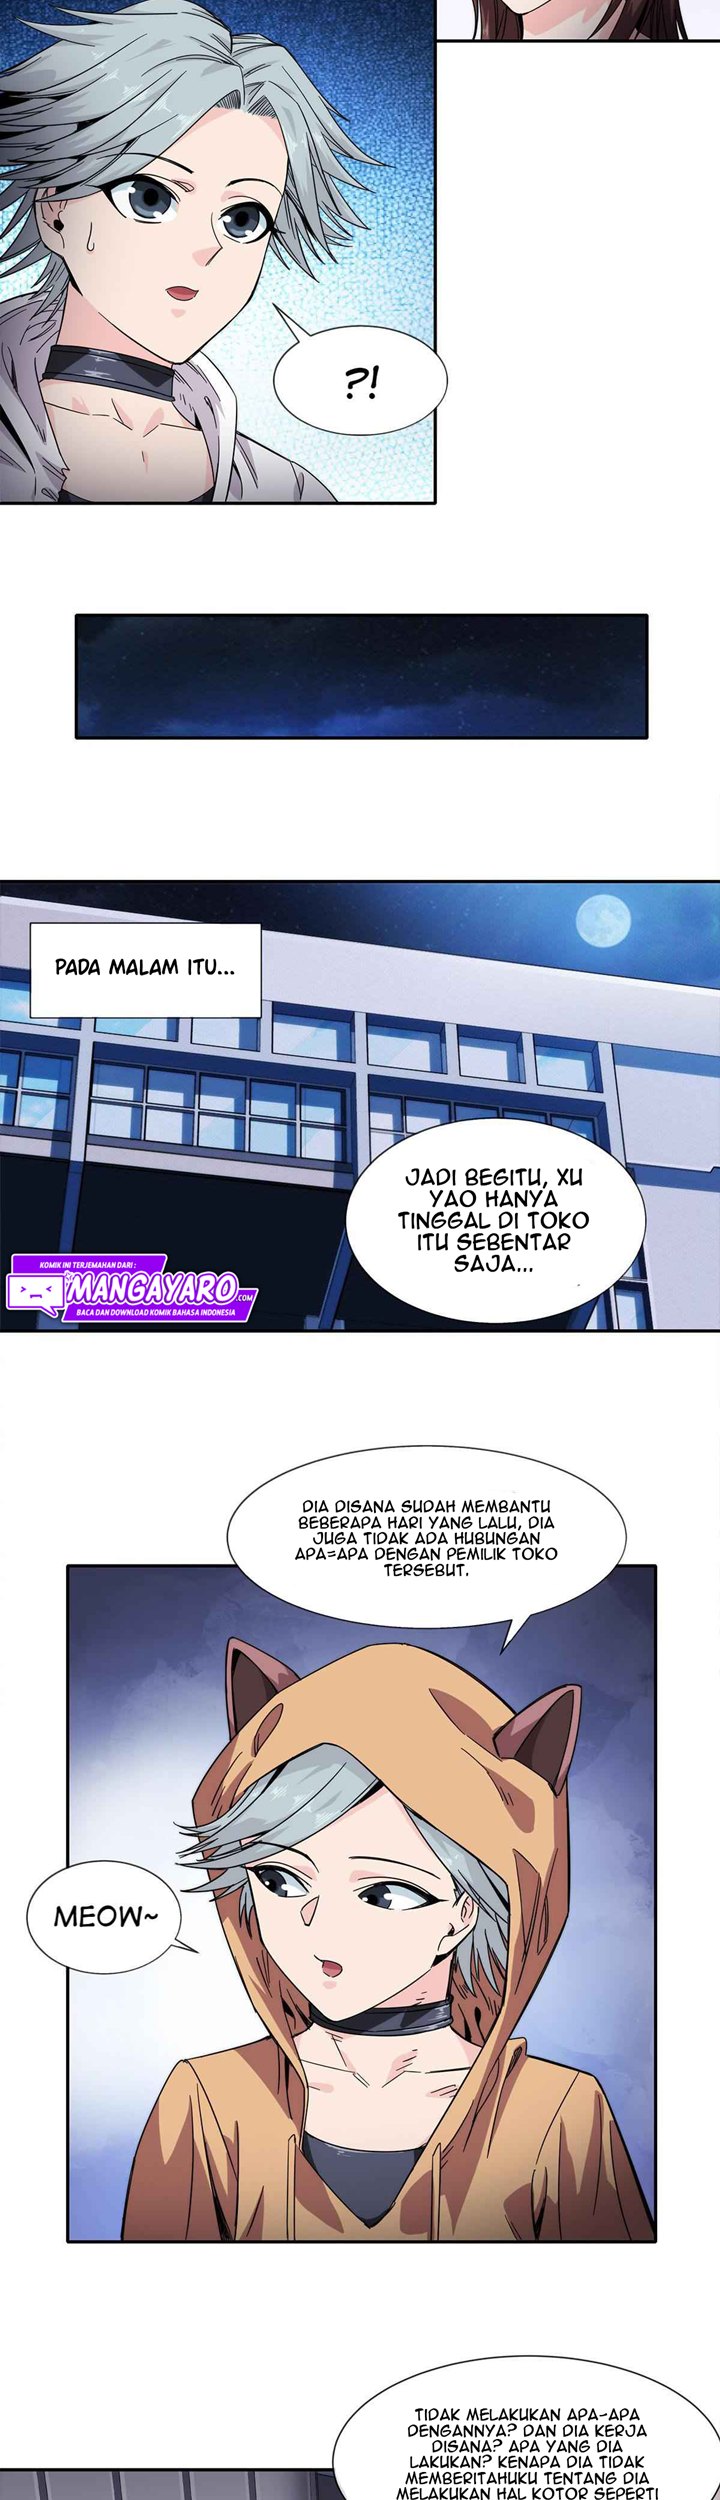 The King of Night Market Chapter 23 13